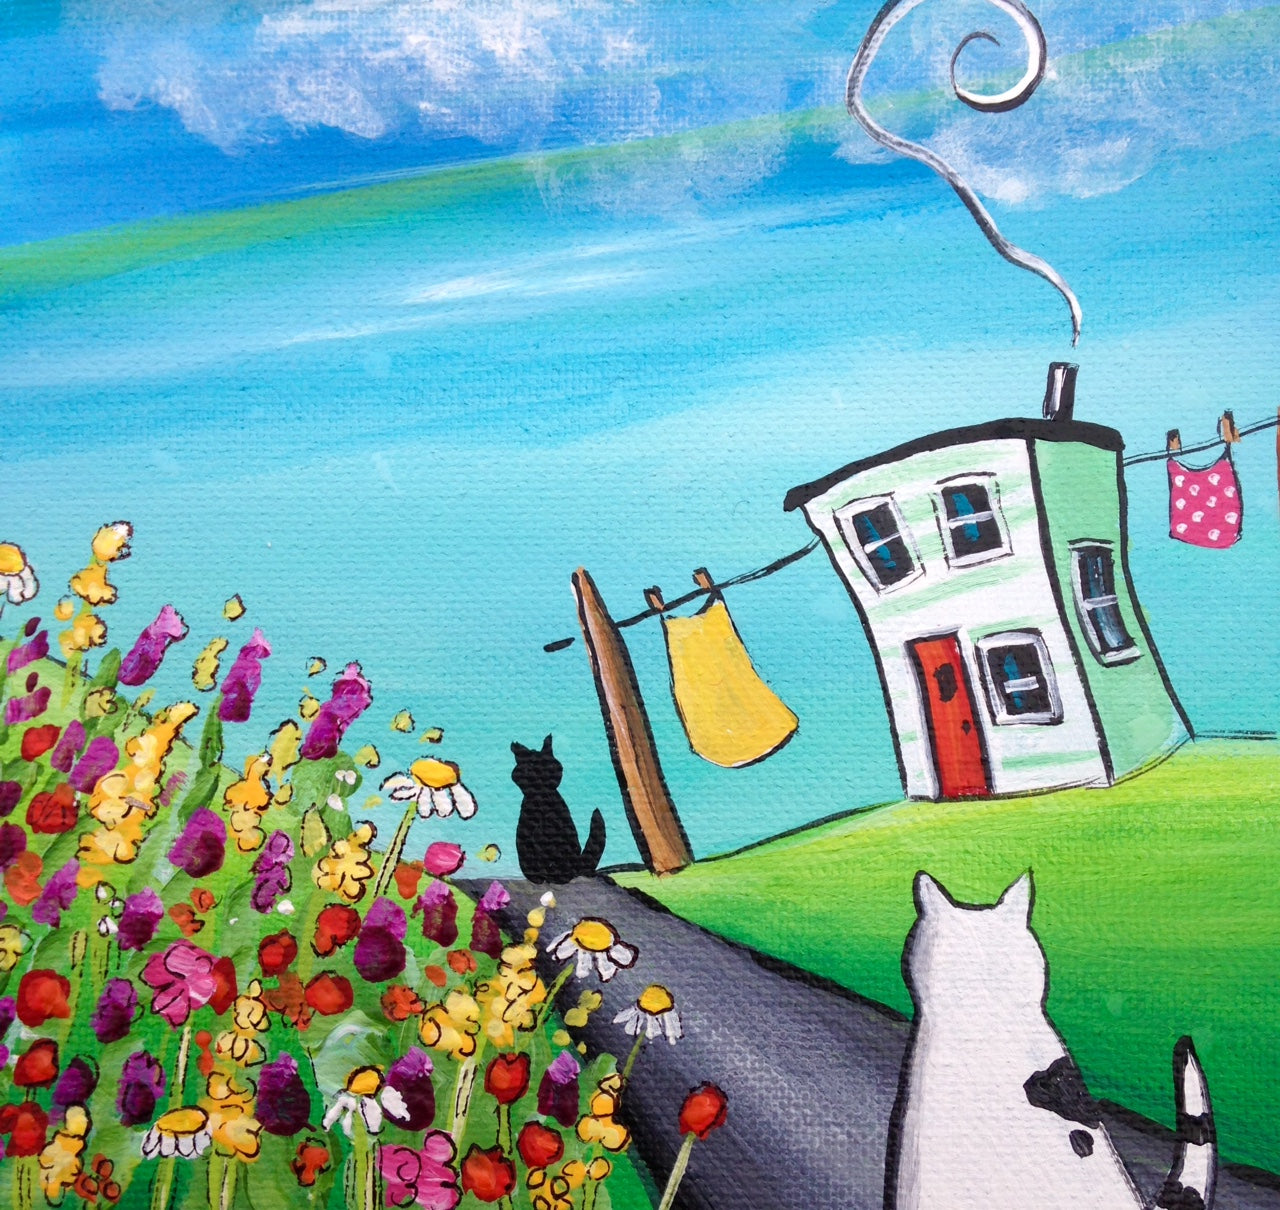 (SOLD) Flora Purred When She Saw the Little Black Come Strolling Down the Road to Meet Her By Nan's Wildflowers